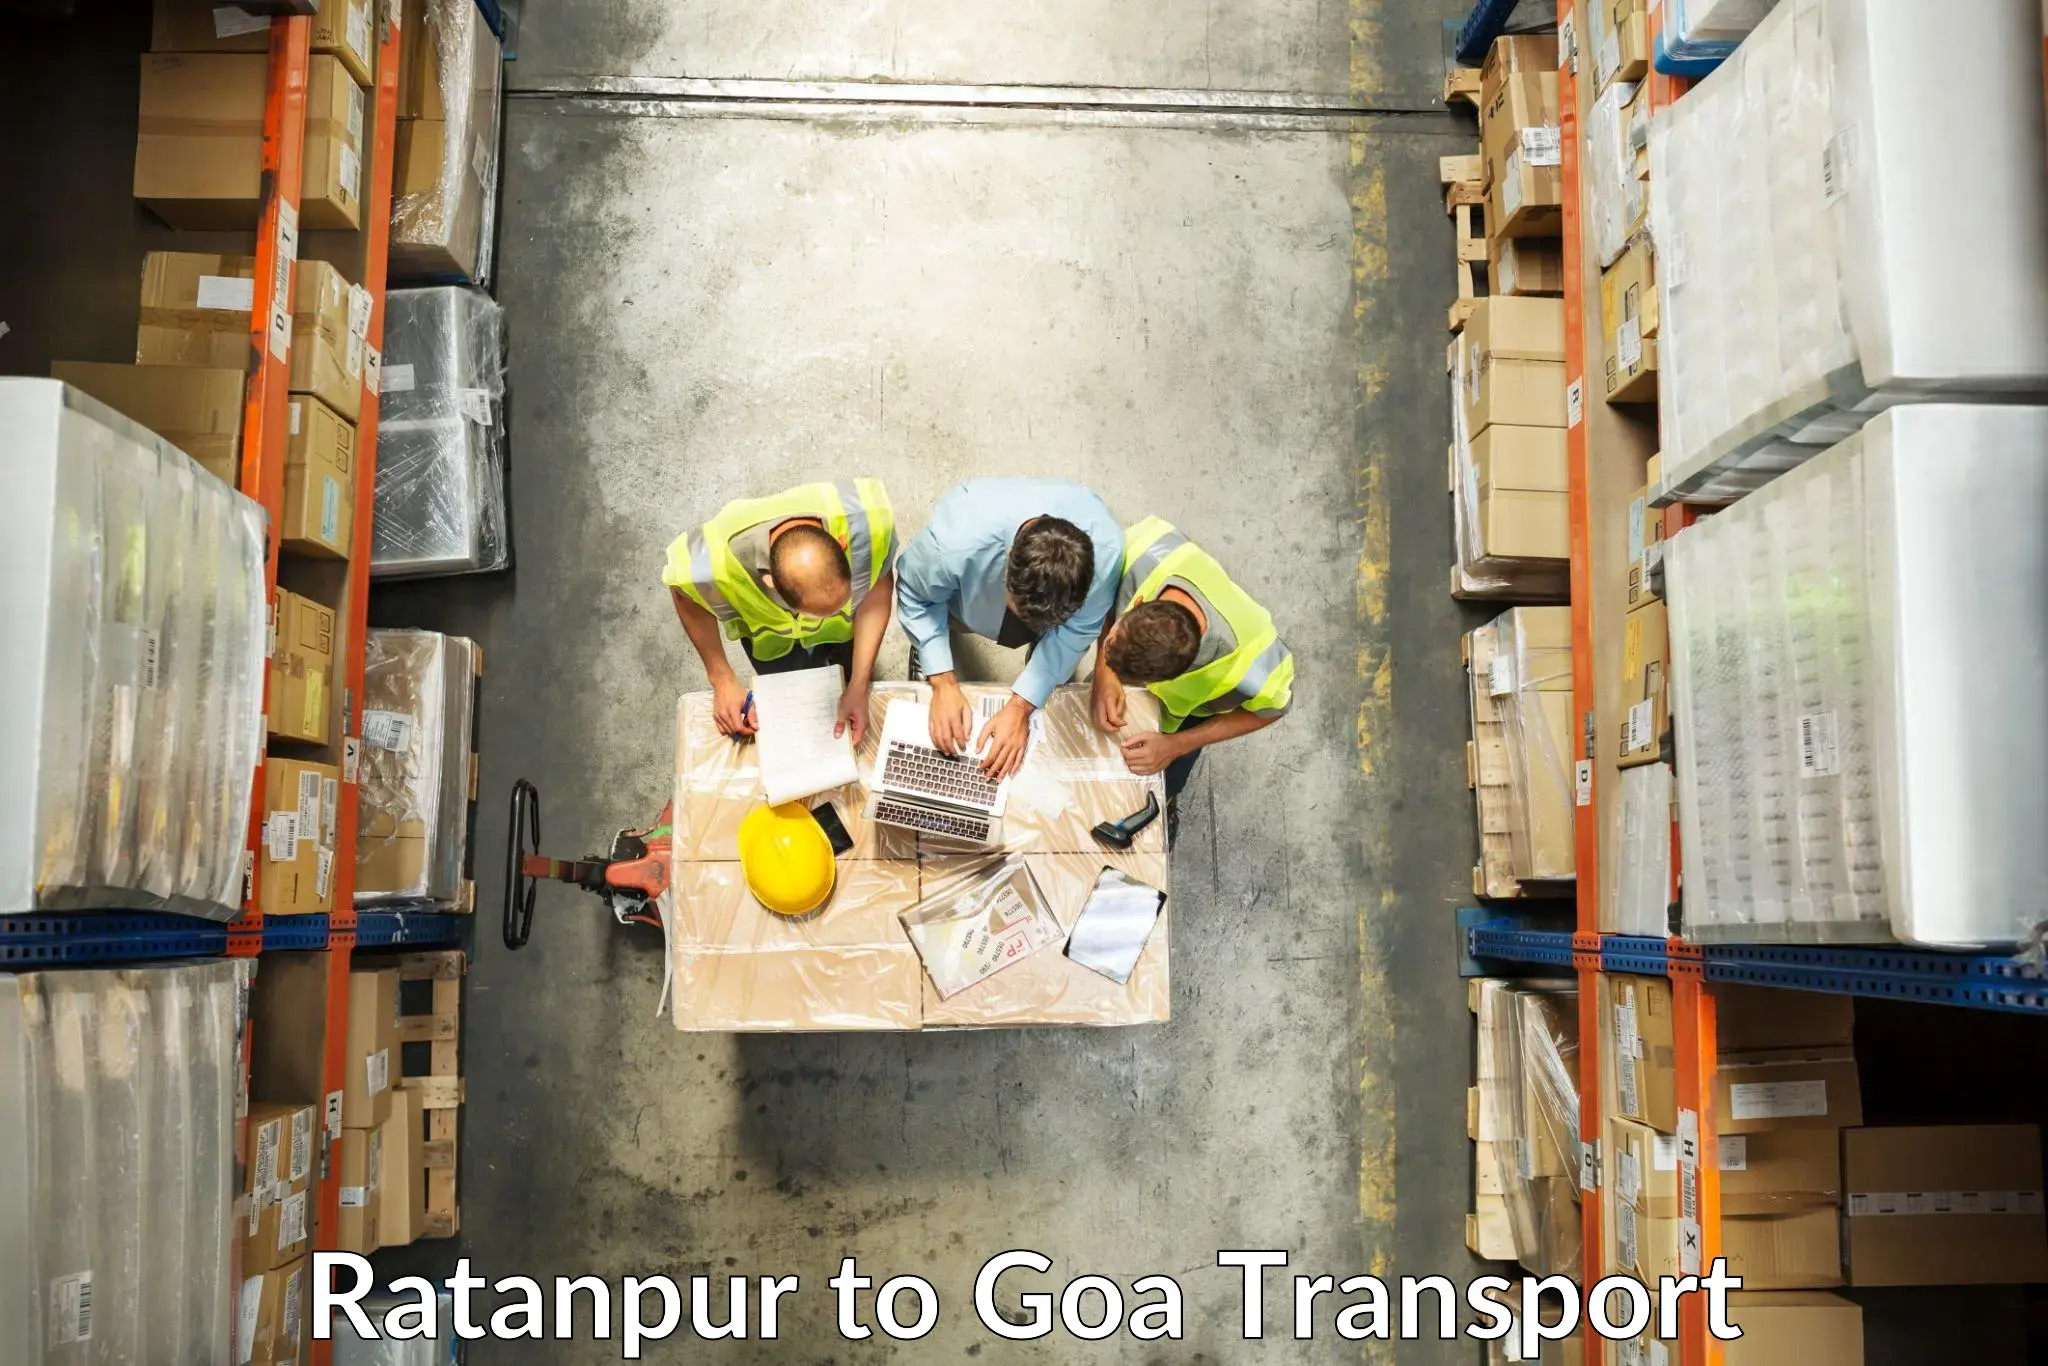 Truck transport companies in India in Ratanpur to Goa